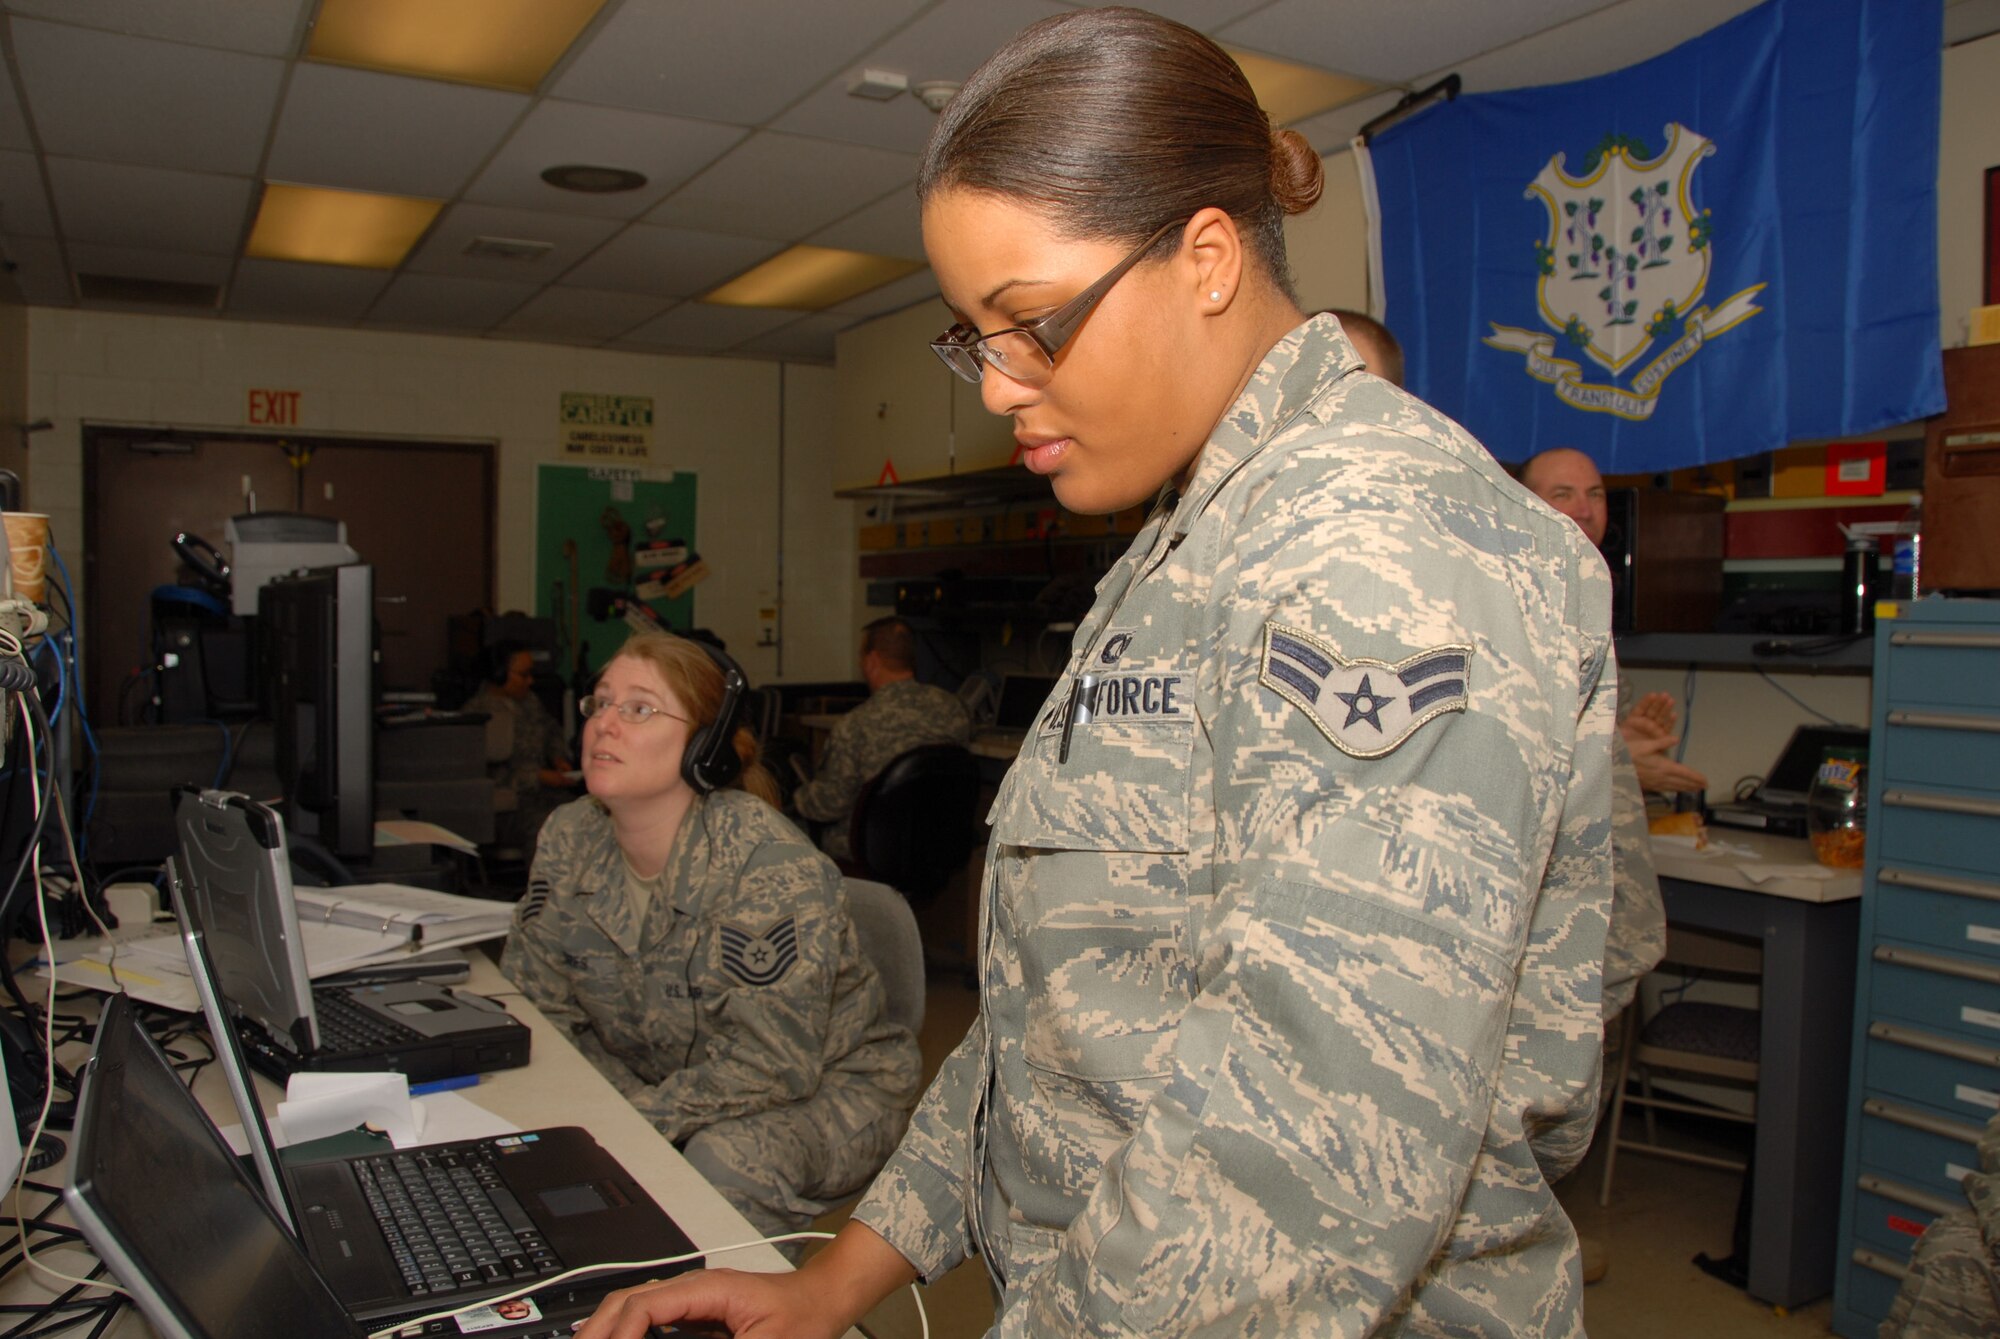 Airman 1st Class Desiree Patterson, aerospace control and warning systems apprentice, 103d Air Operations Group, establishes connectivity to a live video feed of the Presidential Inauguration, Jan. 20, 2009.  The Connecticut National Guard deployed 12 personnel to Andrews Air Force Base where they supplied a full spectrum of communication services to Joint Task Force District of Columbia.  (U.S. Air Force Photo by Staff Sgt. Erin McNamara)